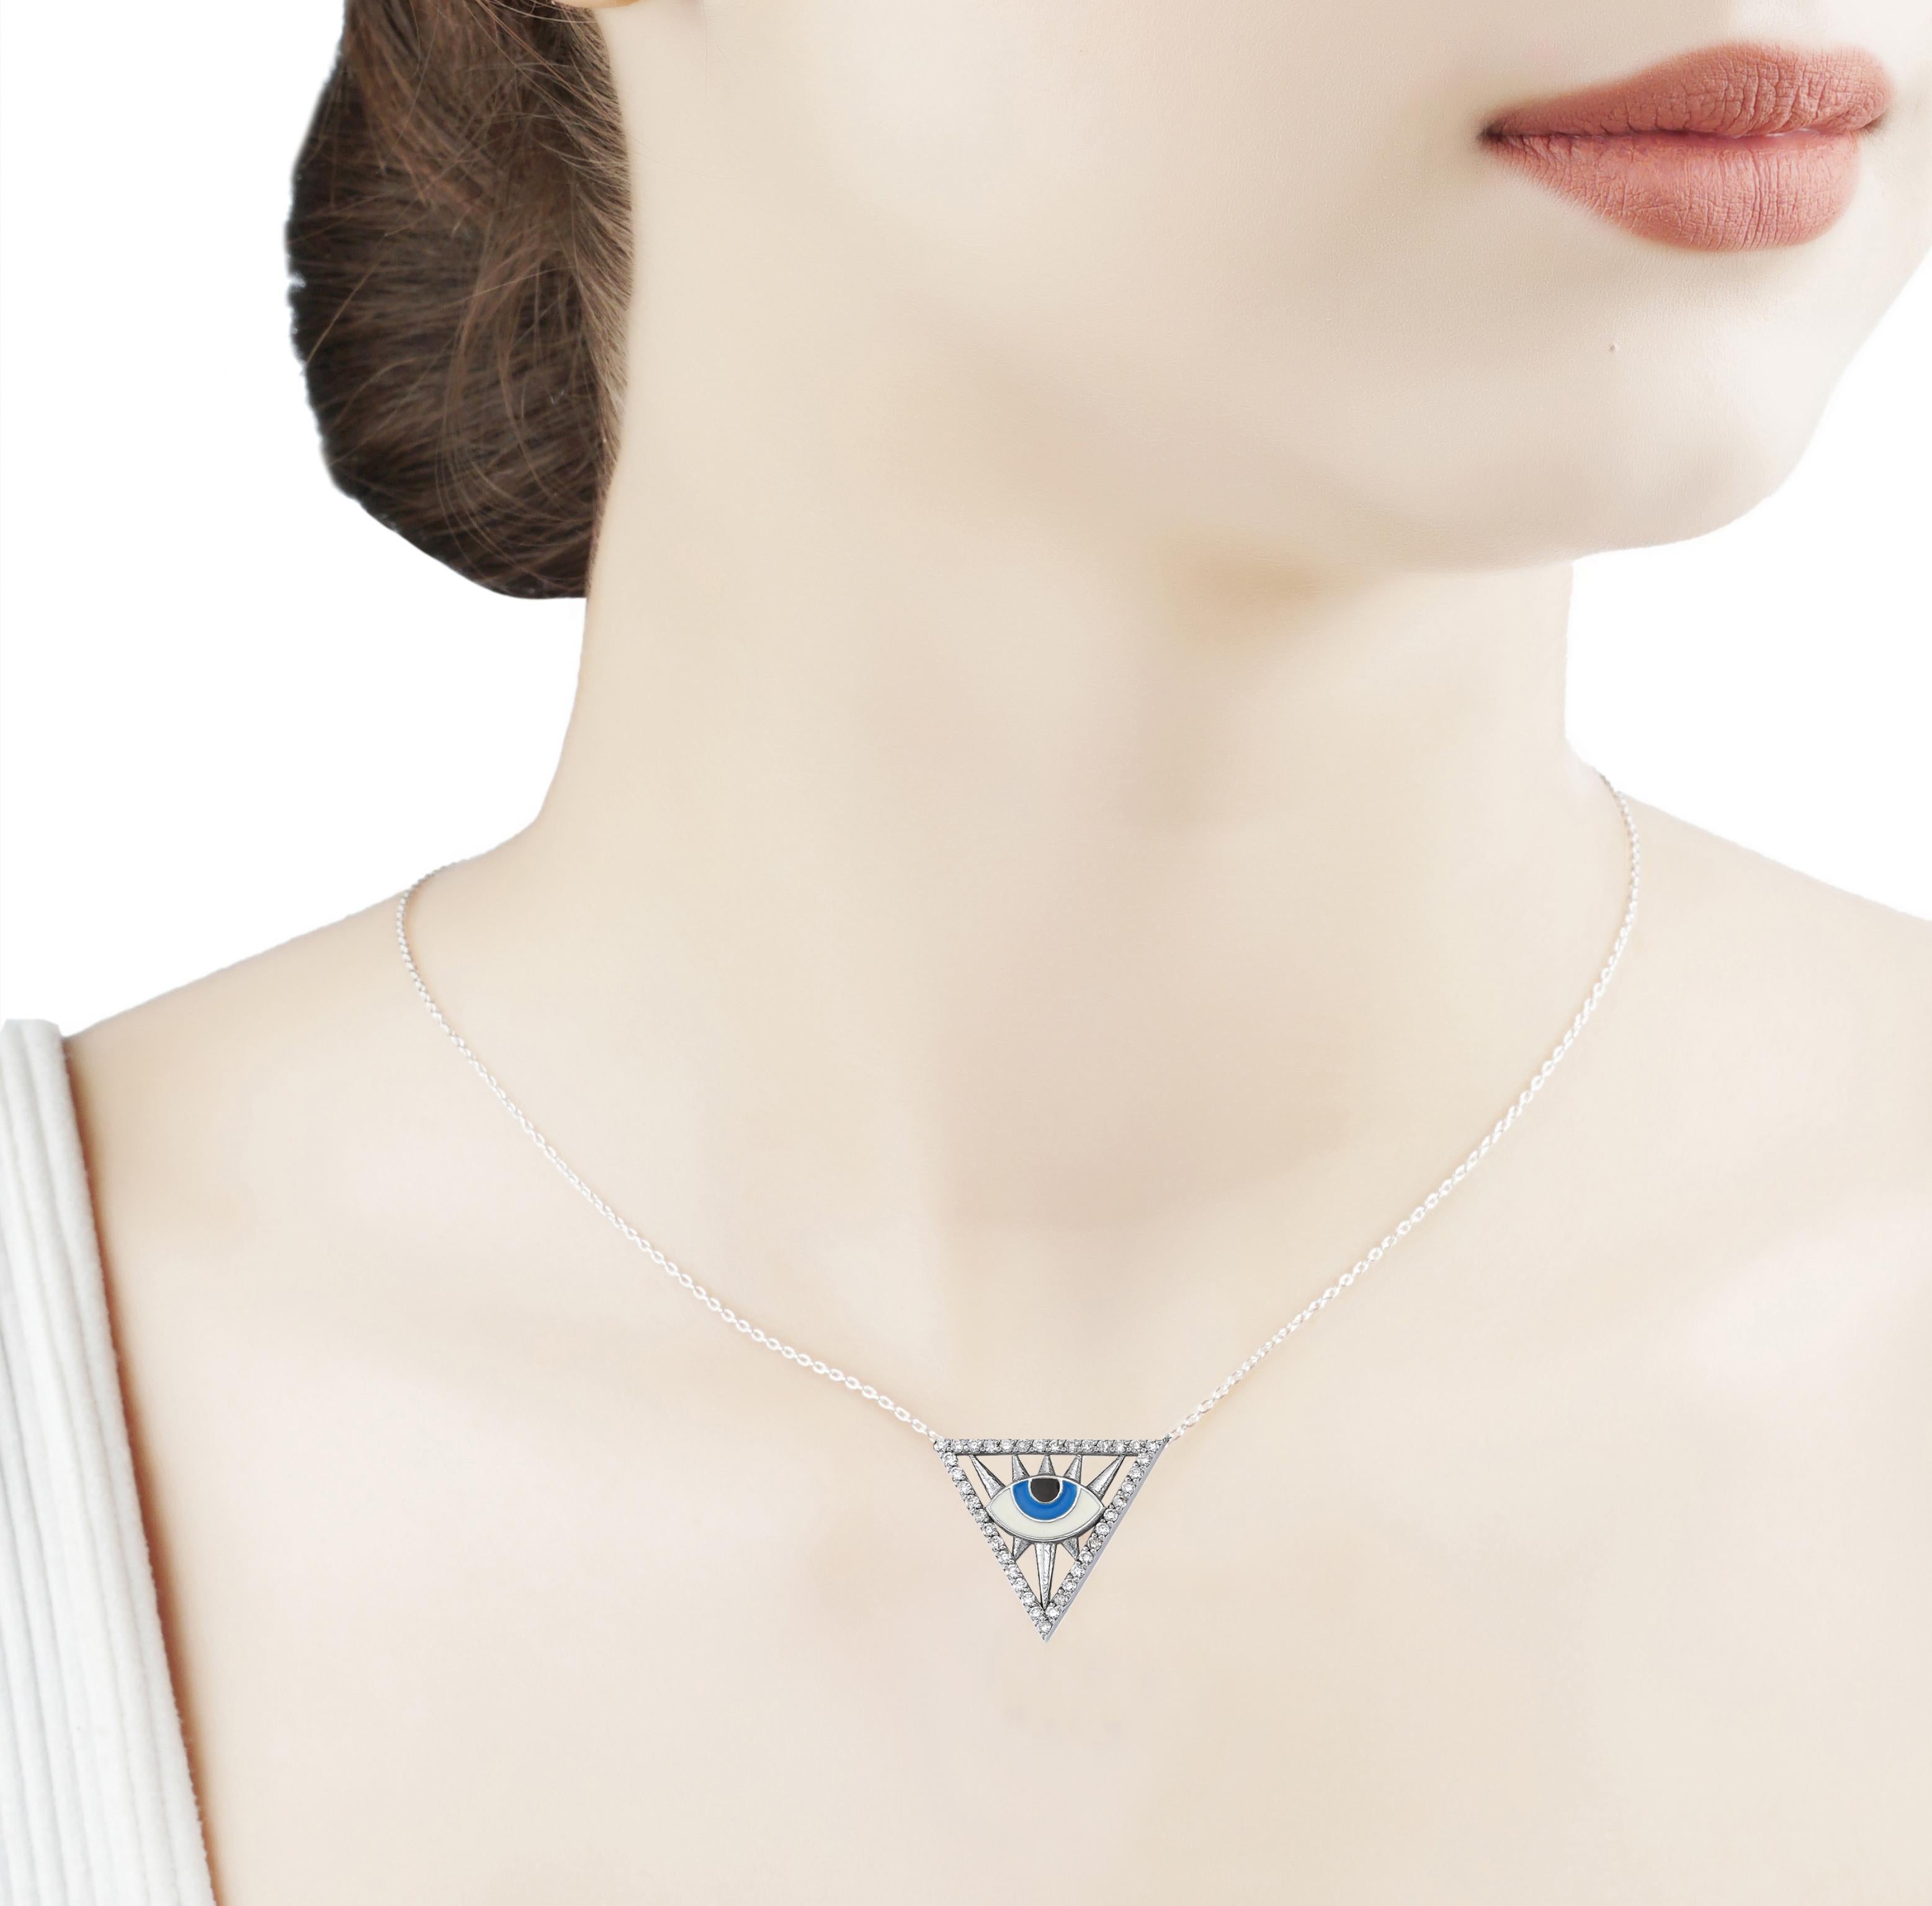 Eye See You! Triangle Pendant Necklace by Nazarlique Evil Eye Collection. 
18 Karat White Gold With Diamond Pavé and Enamel. 

Our Necklaces Will Take Your Breath Away. Each Evil Eye Model Will Add An Elegant Touch To Your Look and Protection,